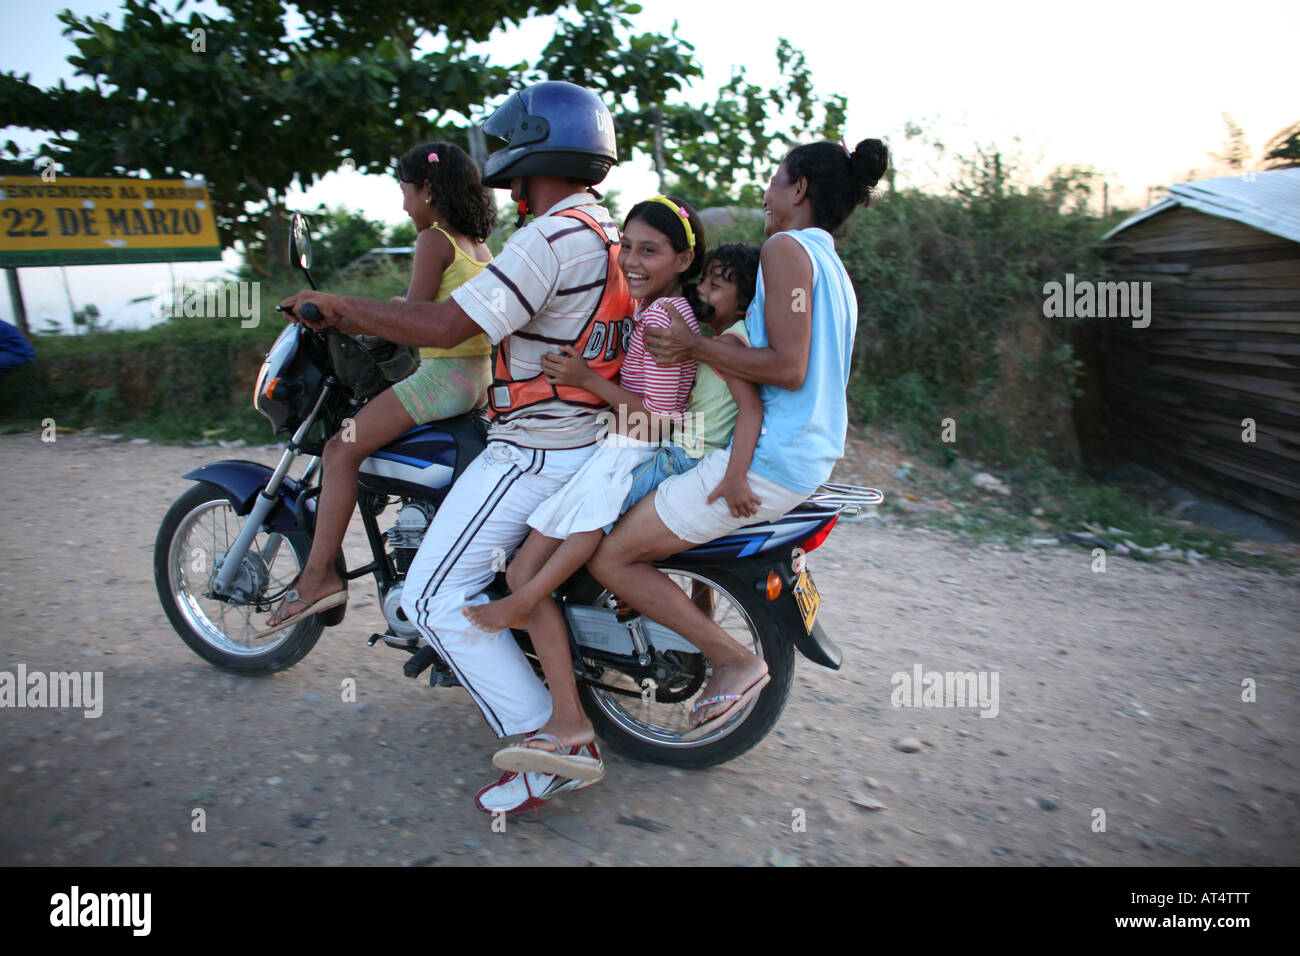 Taxi transport in Colombia often 5 to 6 people sit on a motorbike Stock Photo